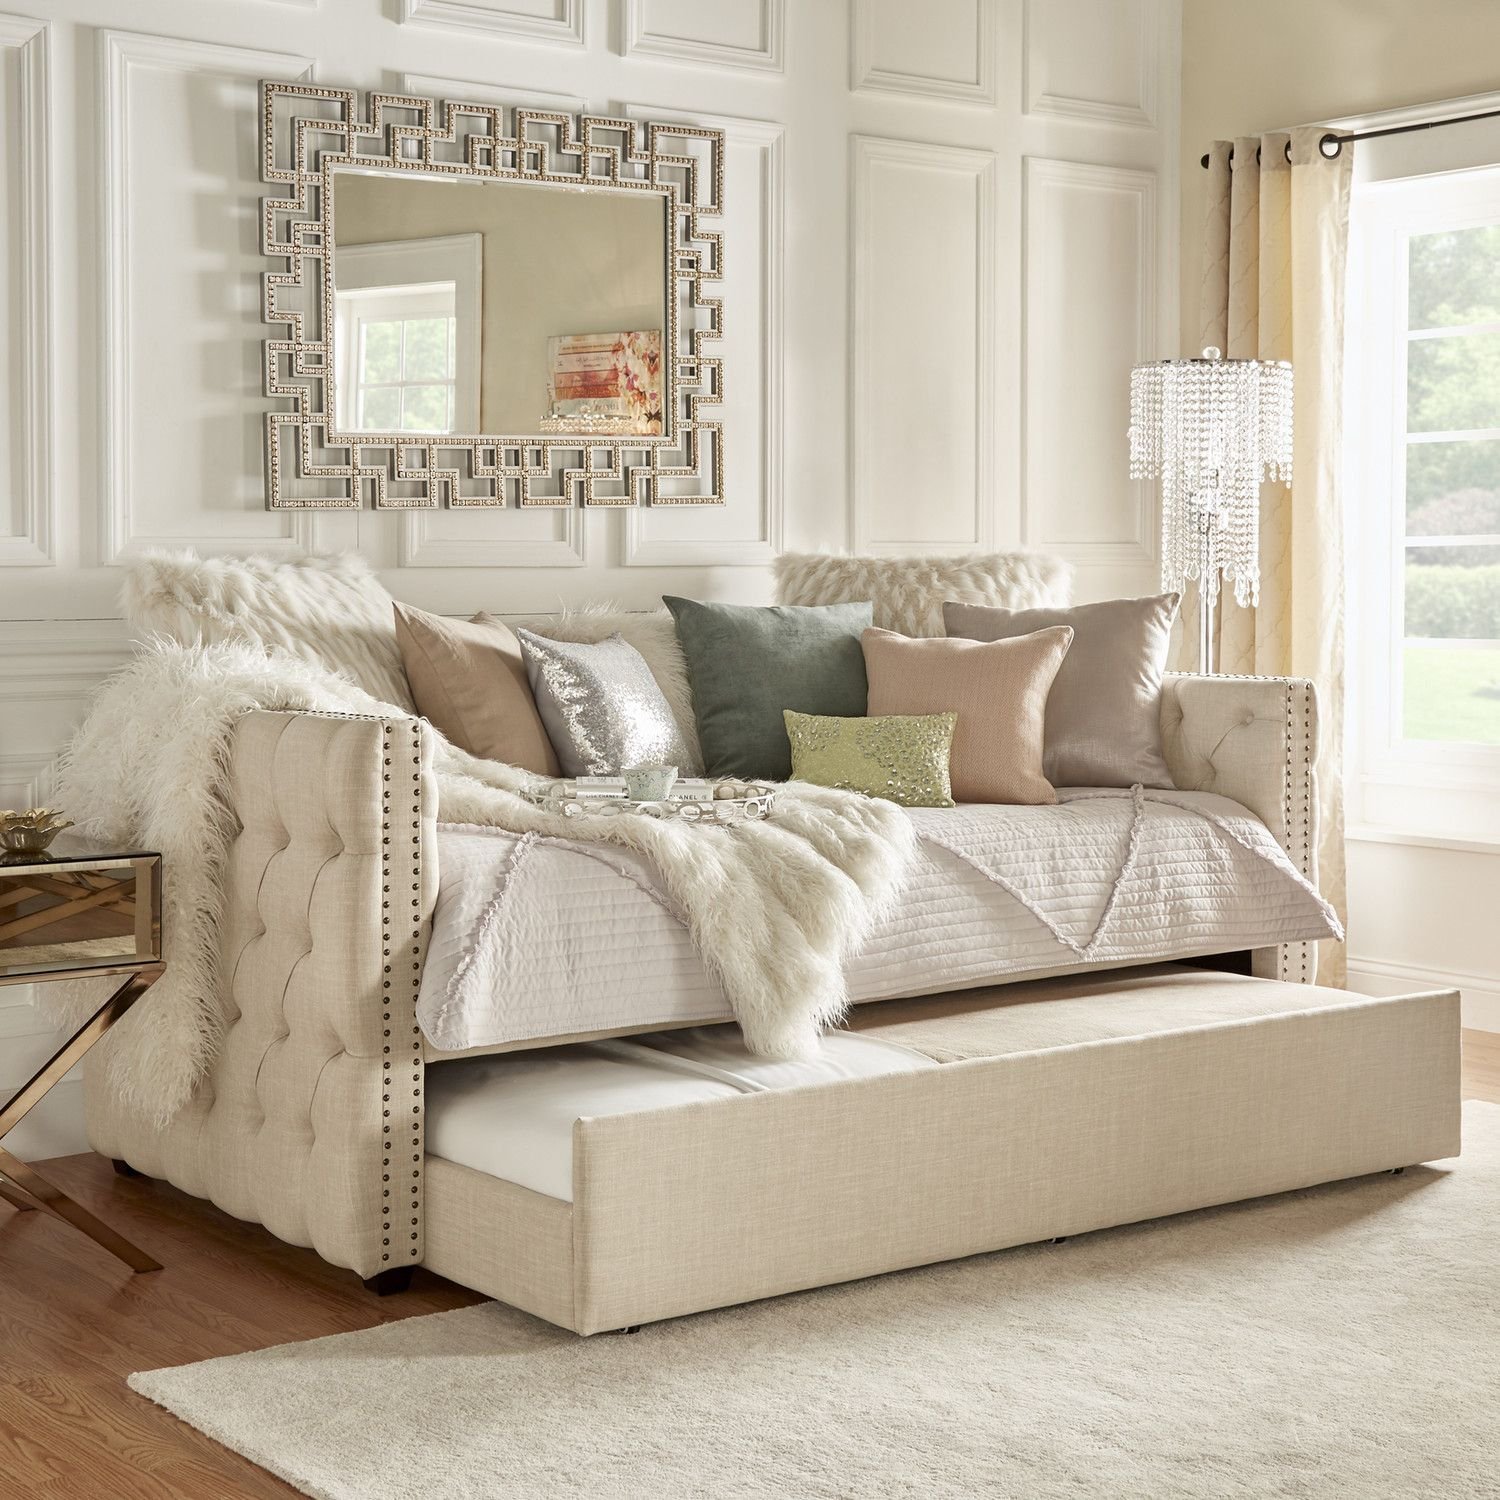 Кровать Annika Upholstered Daybed with Trundle